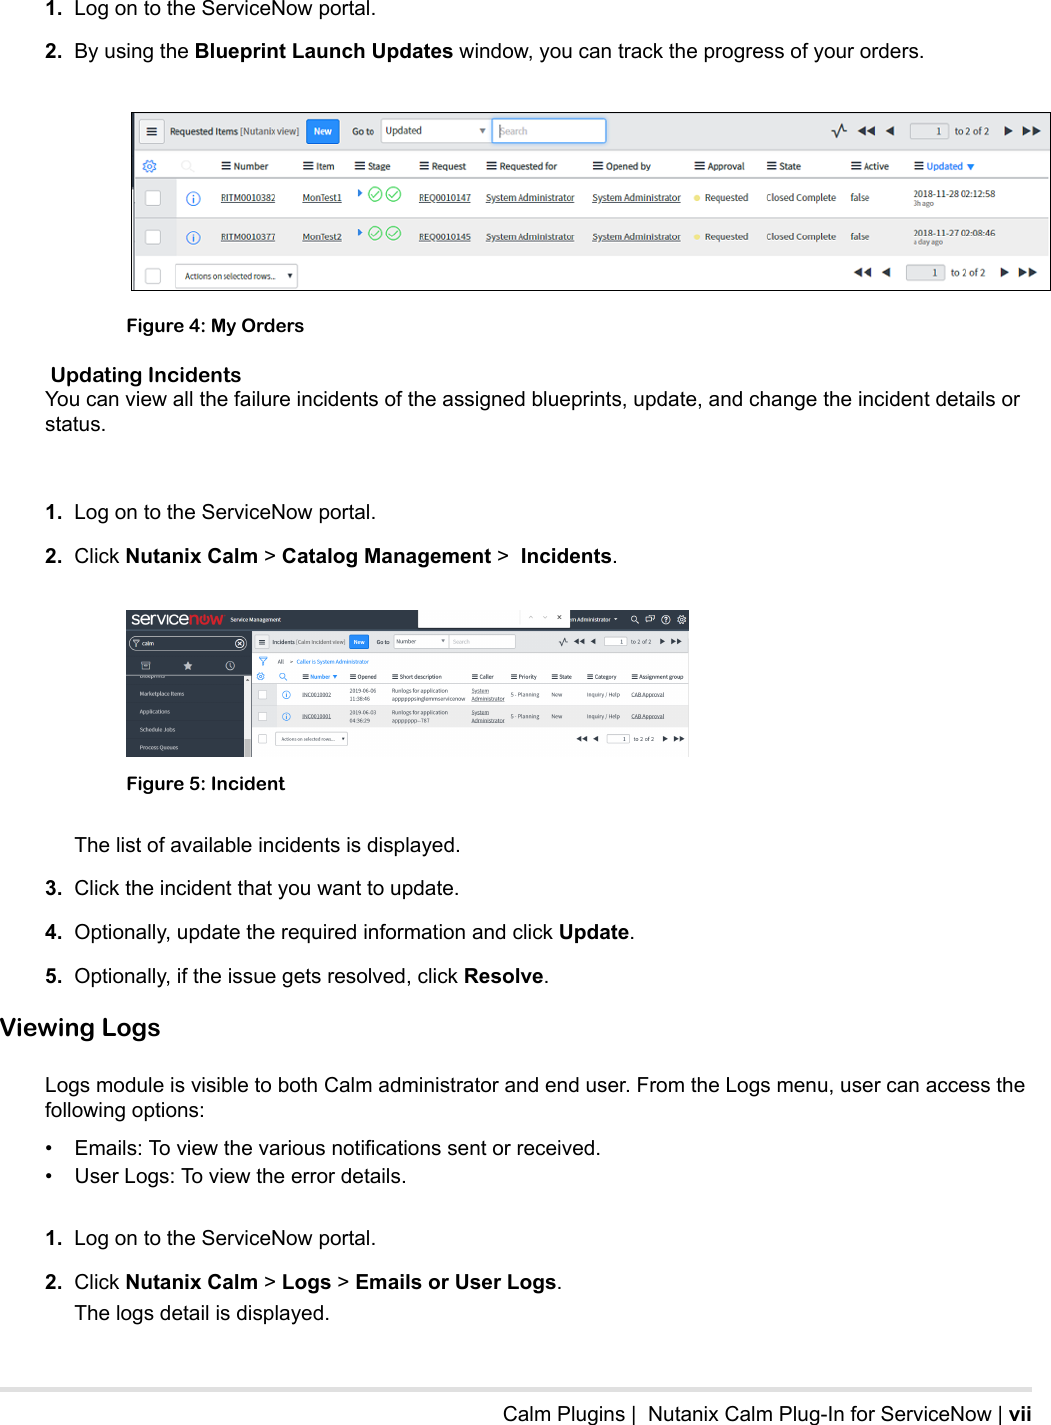 Page 7 of 9 - ServiceNow Calm Plug-In User Guide Calm-Service Now-Plug-In-User-Guide-v1.0